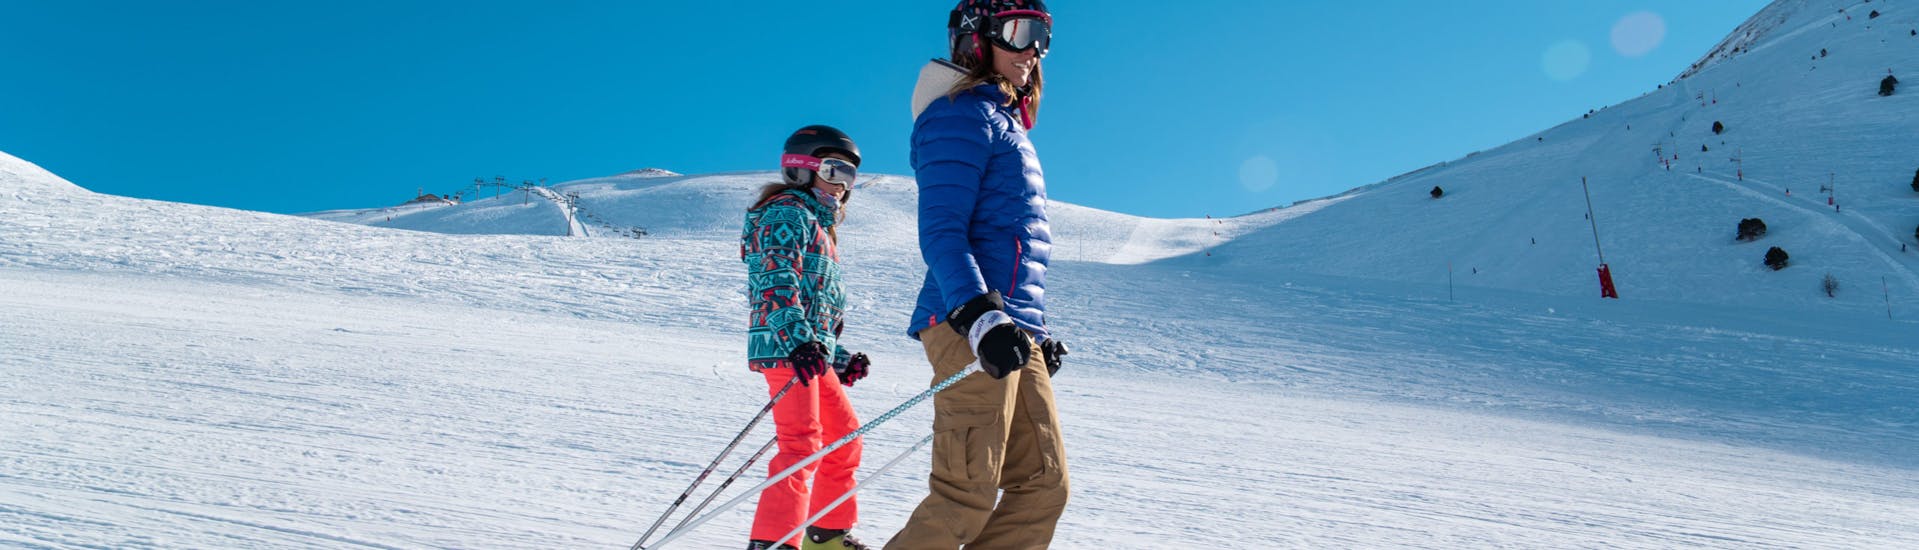 Kid doing Kids Ski Lessons (5-13 y.) for First Timers & Beginners - Max 6 from Evolution 2 Saint Lary Soulan.